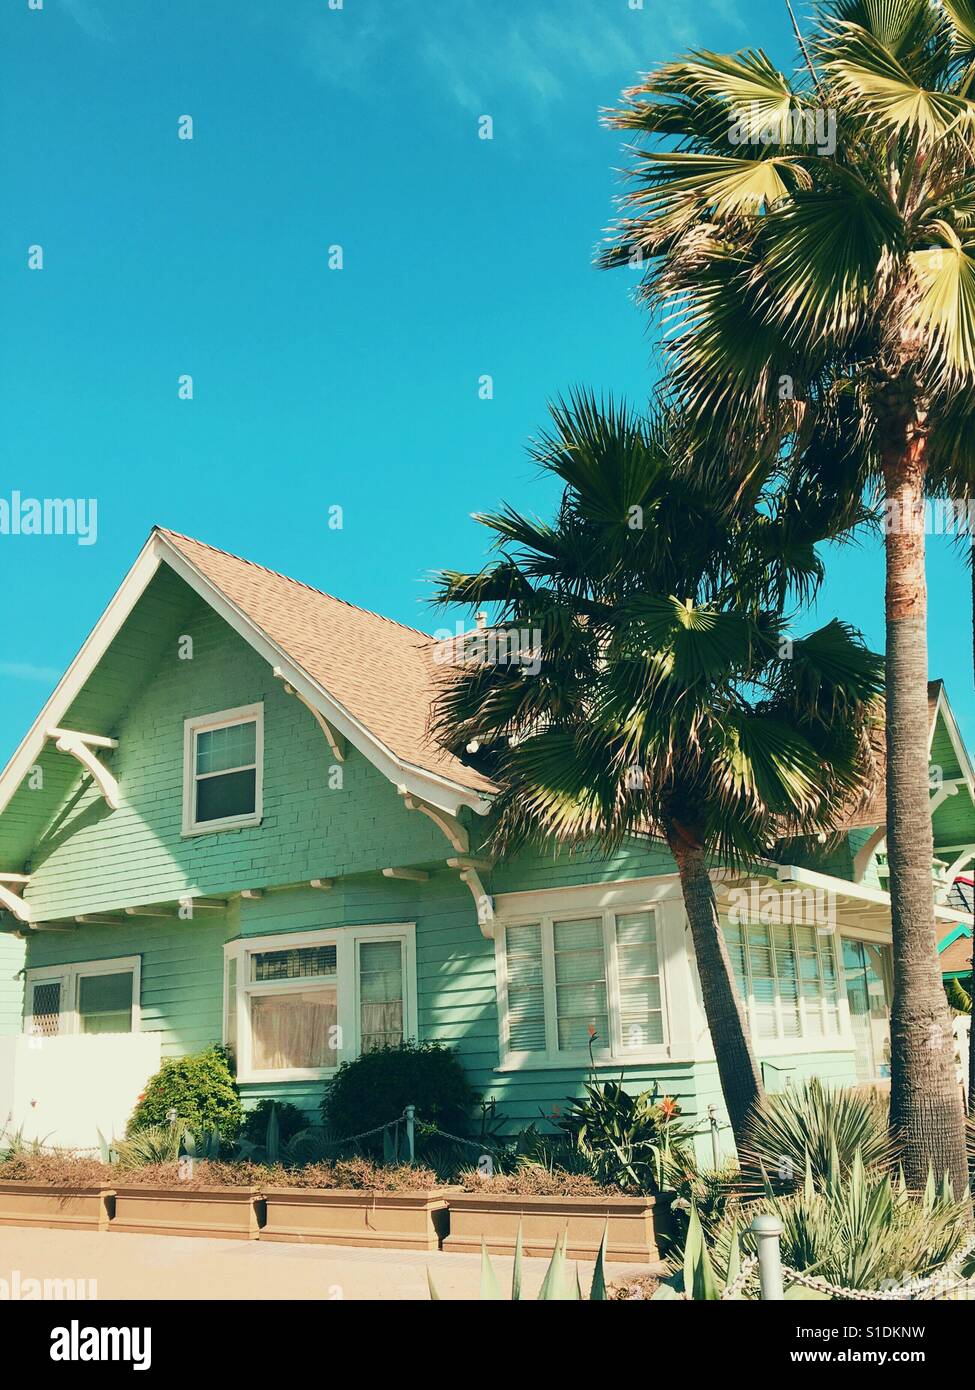 Charming old wood house and palm trees under a bright blue sky on a sunny day. Stock Photo